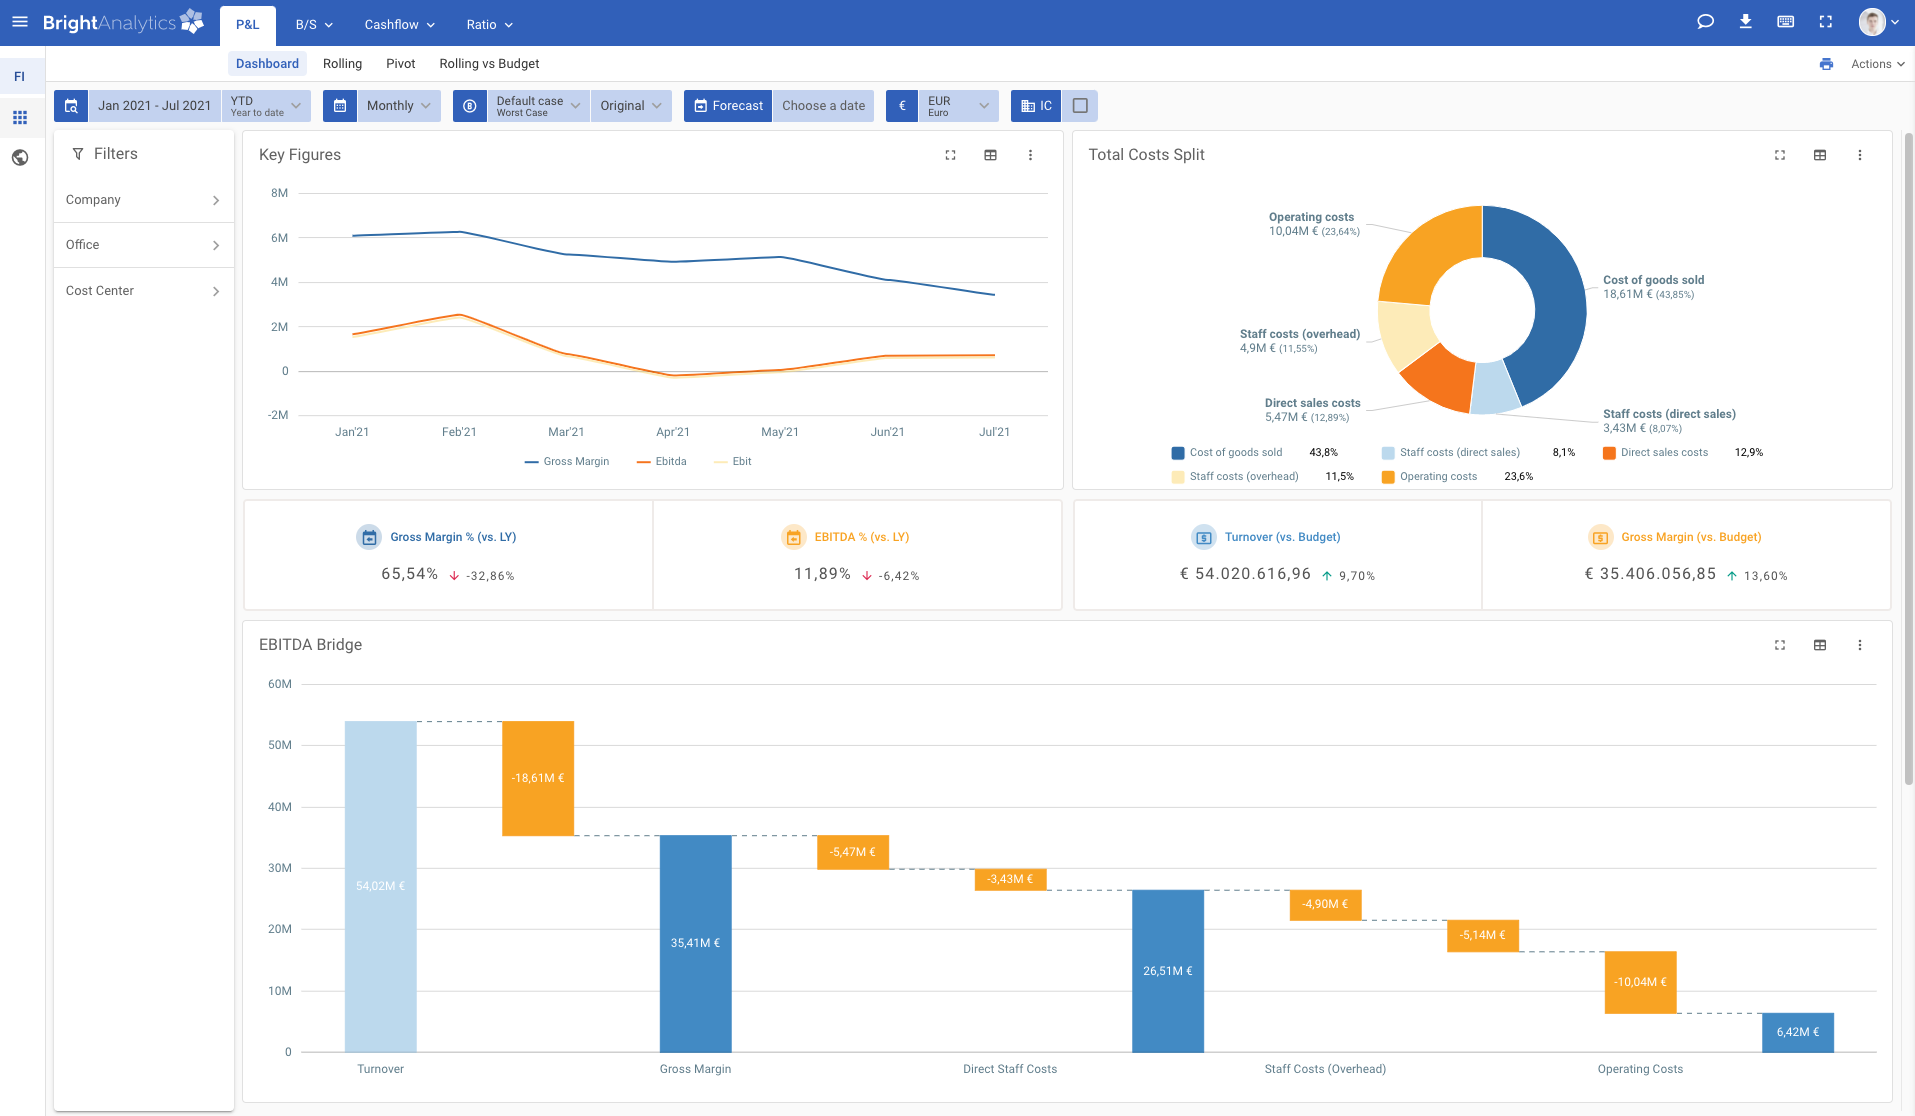 Clausion alternative - Intuitive and user-friendly interface of BrightAnalytics